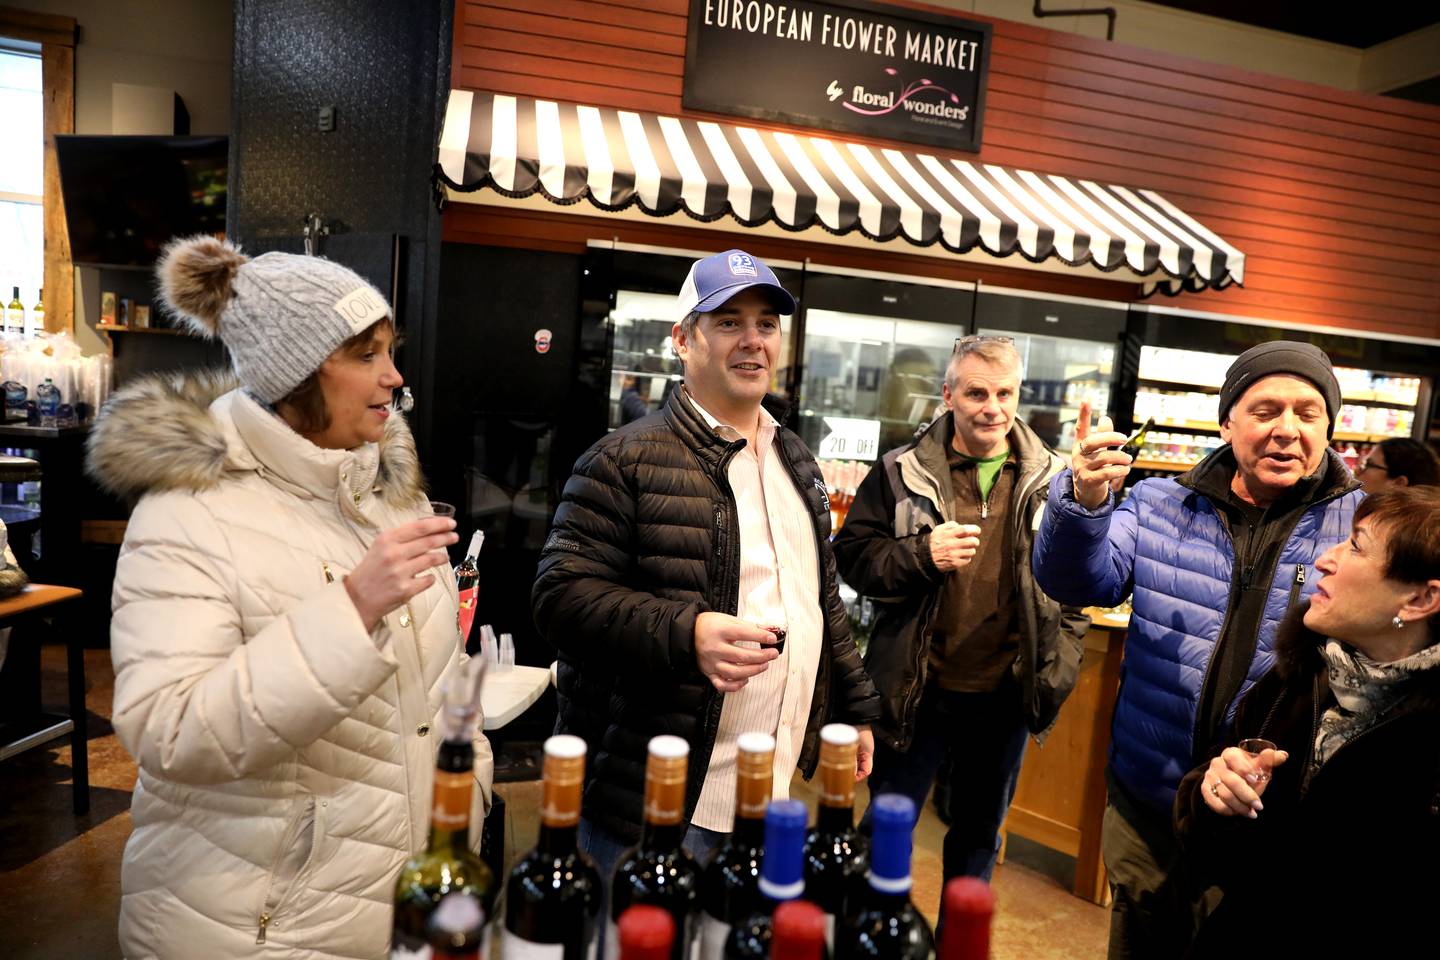 Blue Goose Market President and CEO Paul Lencioni (center) shares a toast with customers during the final wine tasting event on Thursday, Feb. 24, 2022. Lencioni announced the store was closing after more than 90 years in business in early February.